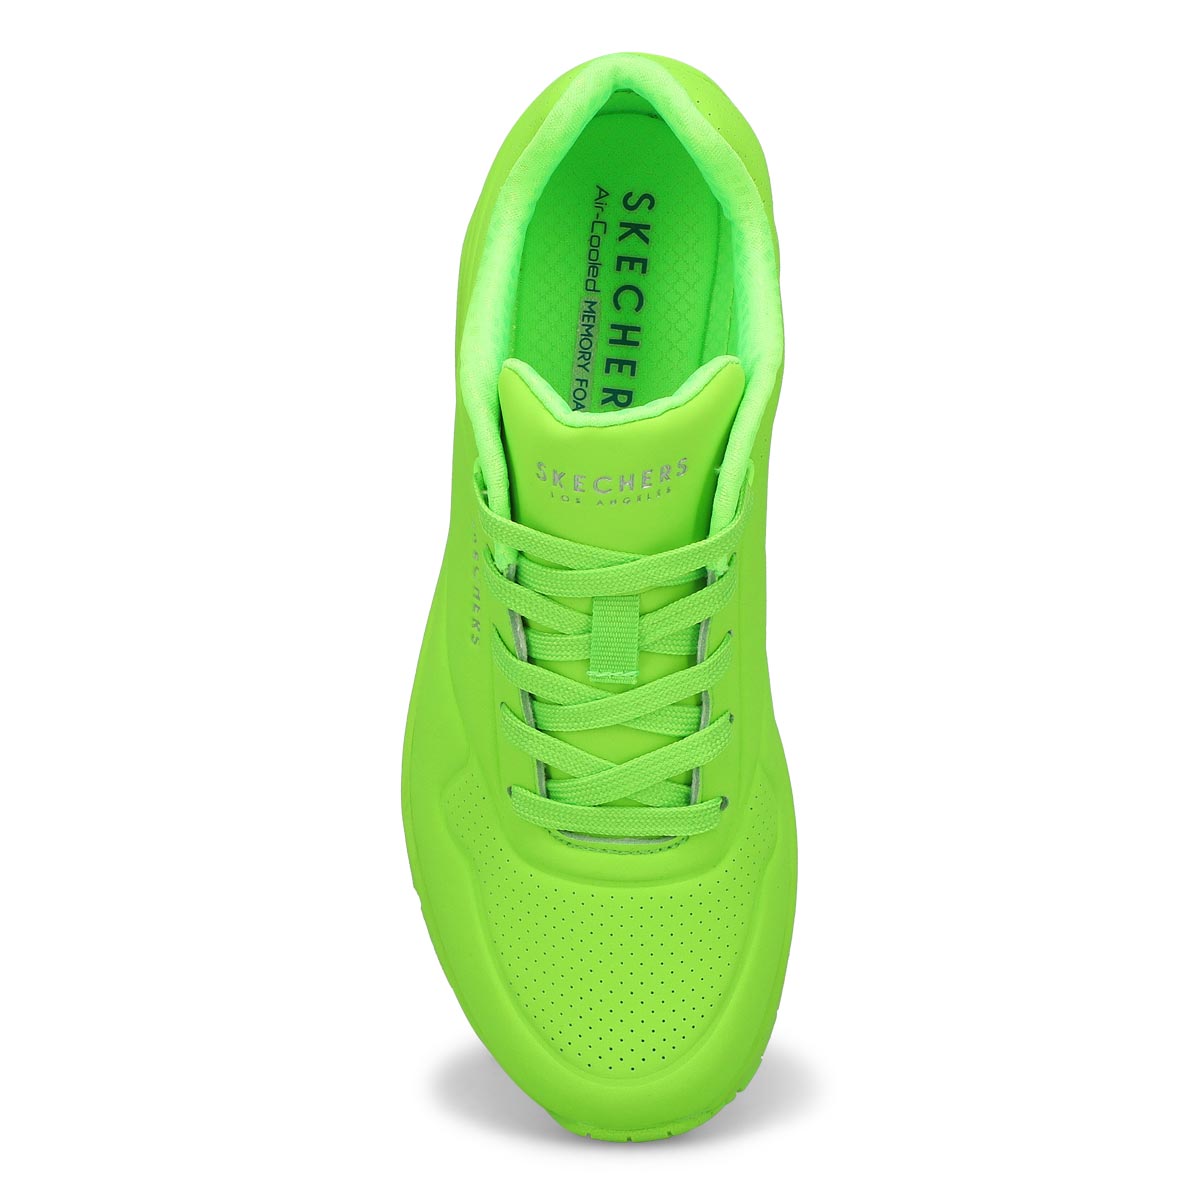 Womens Uno Night Shades Lace Up Sneaker - Lime Green